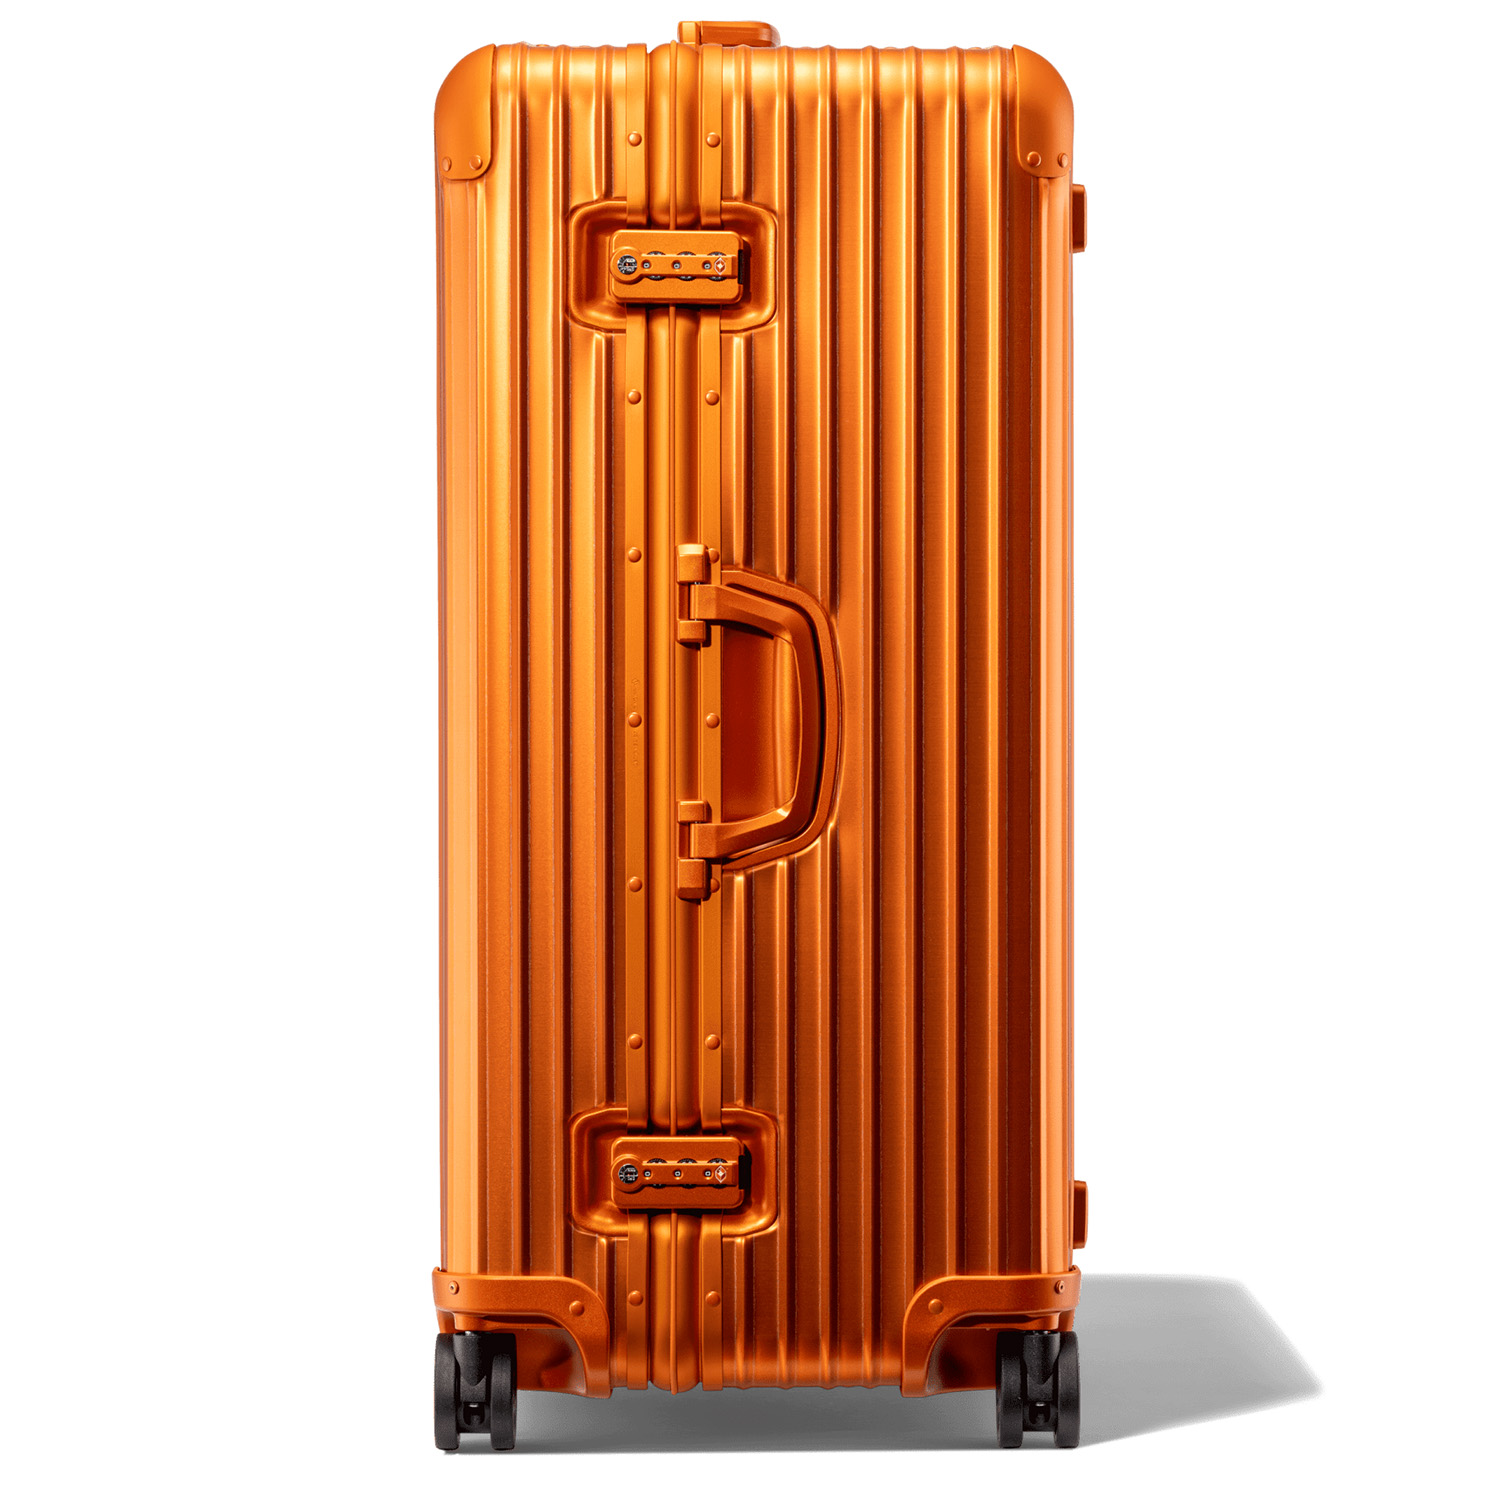 RIMOWA introduces two new limited edition aluminium luggage colours